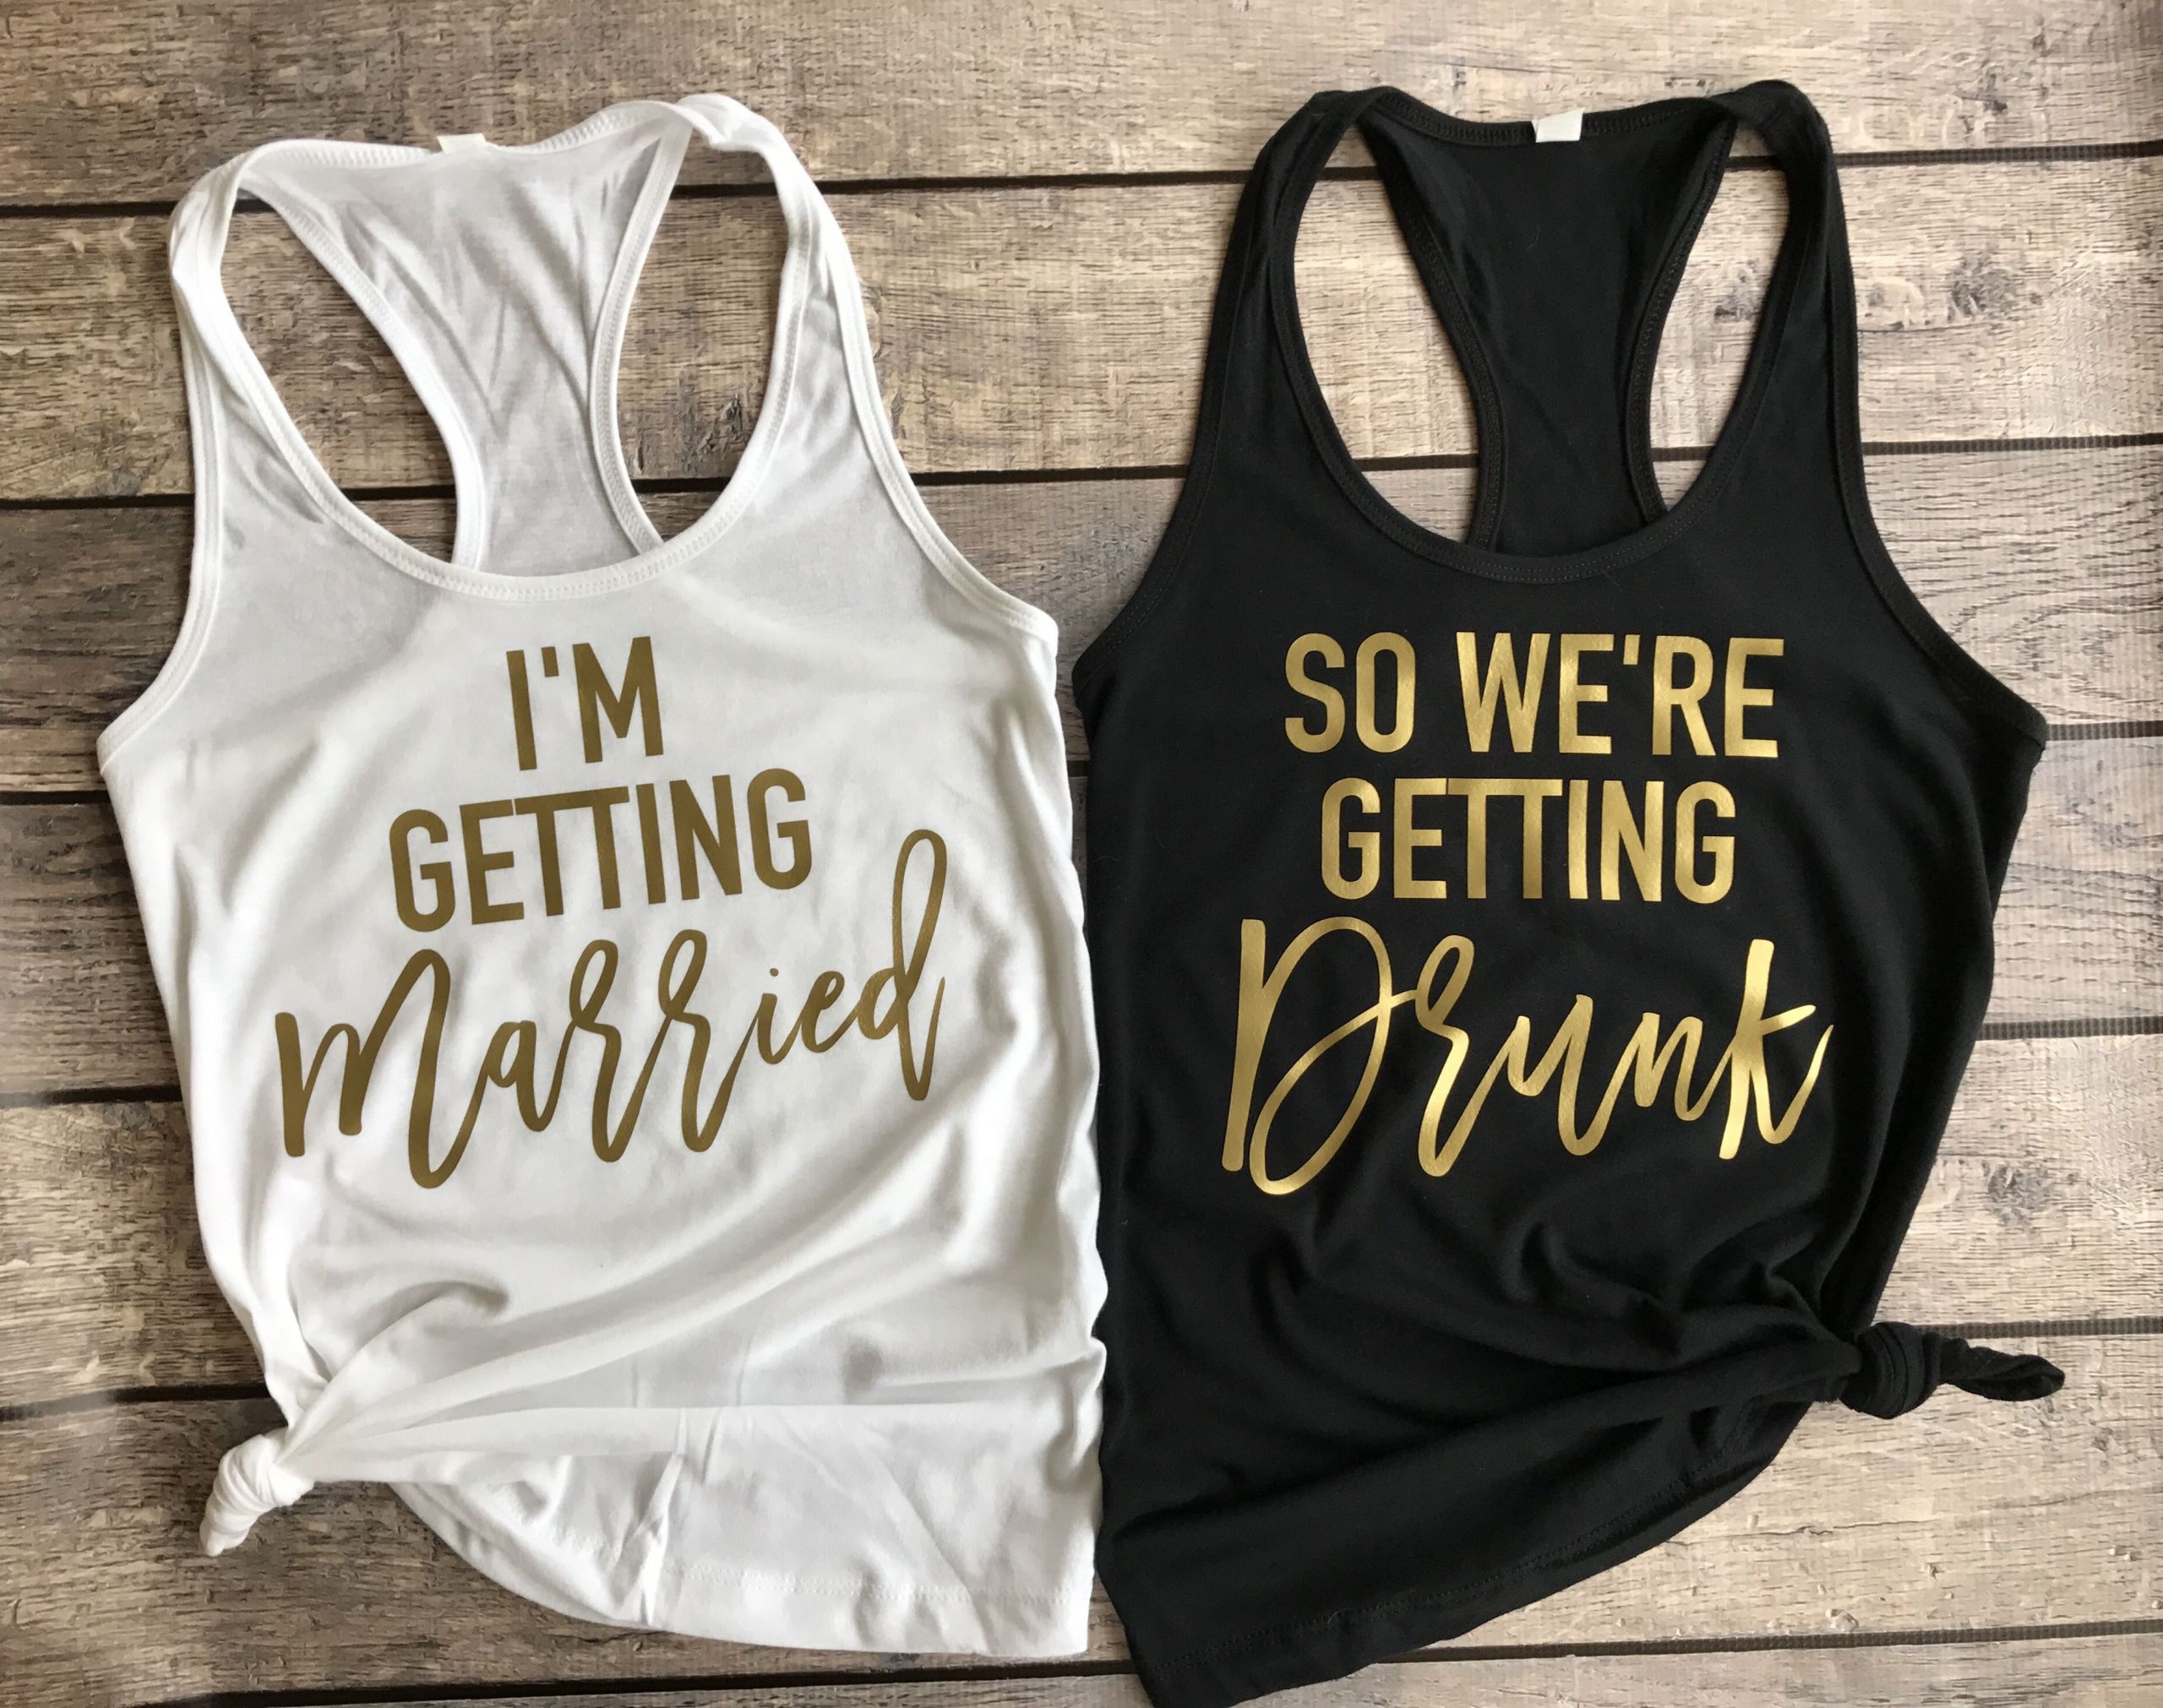 Bridesmaid Ideas For Bachelorette Party
 I m ting married so we re ting drunk bachelorette